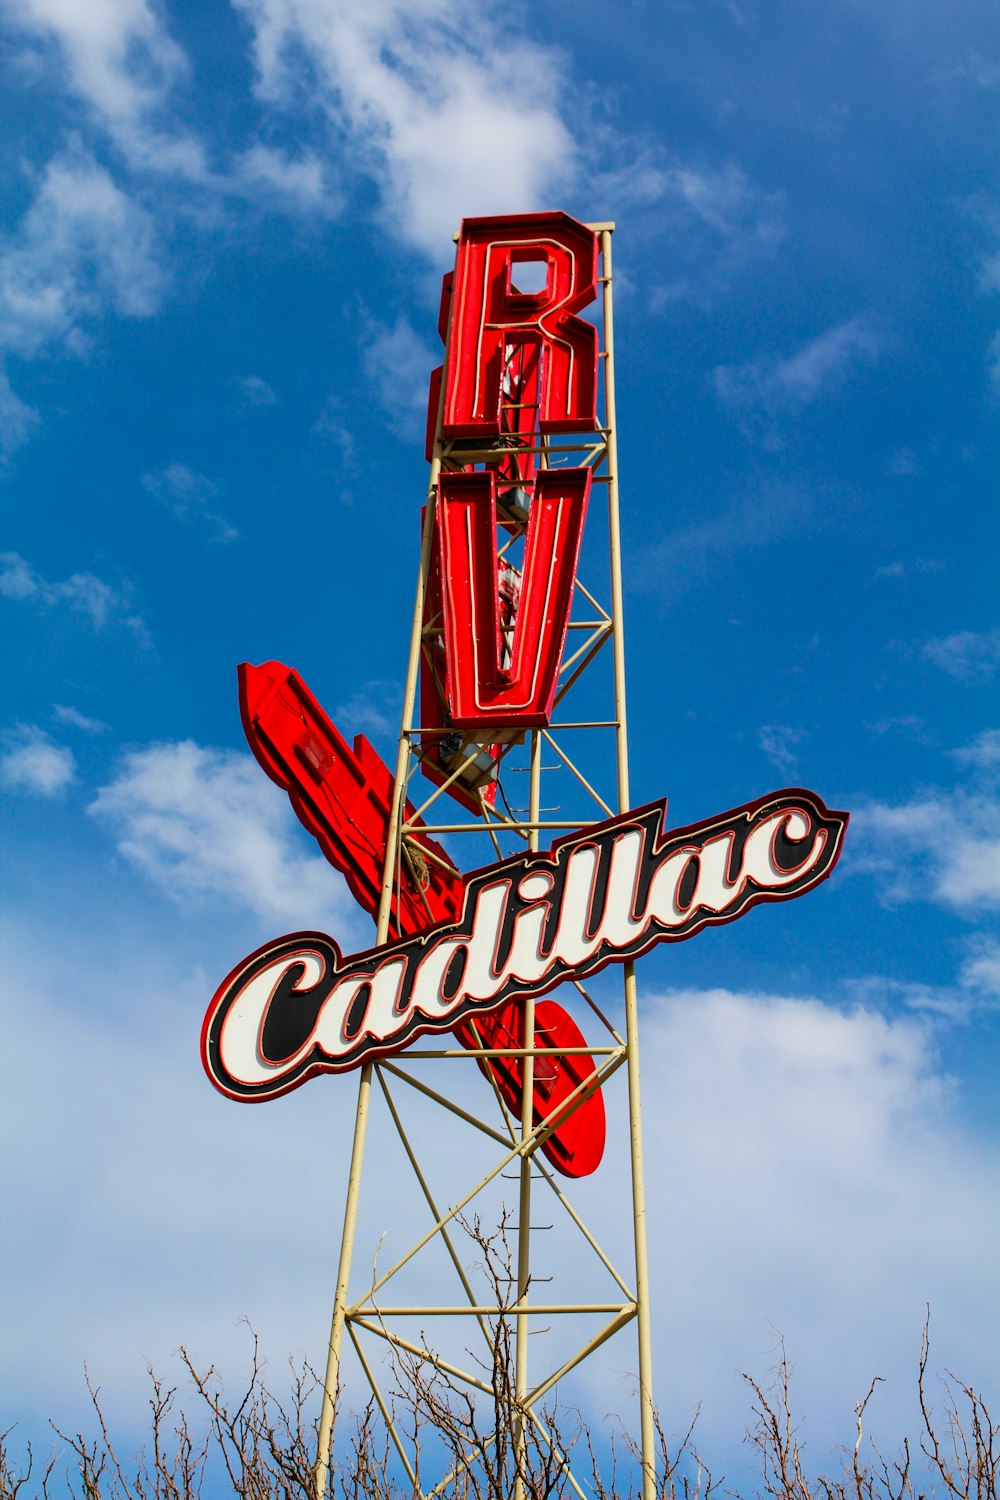 a red and white sign that says cadillac on it